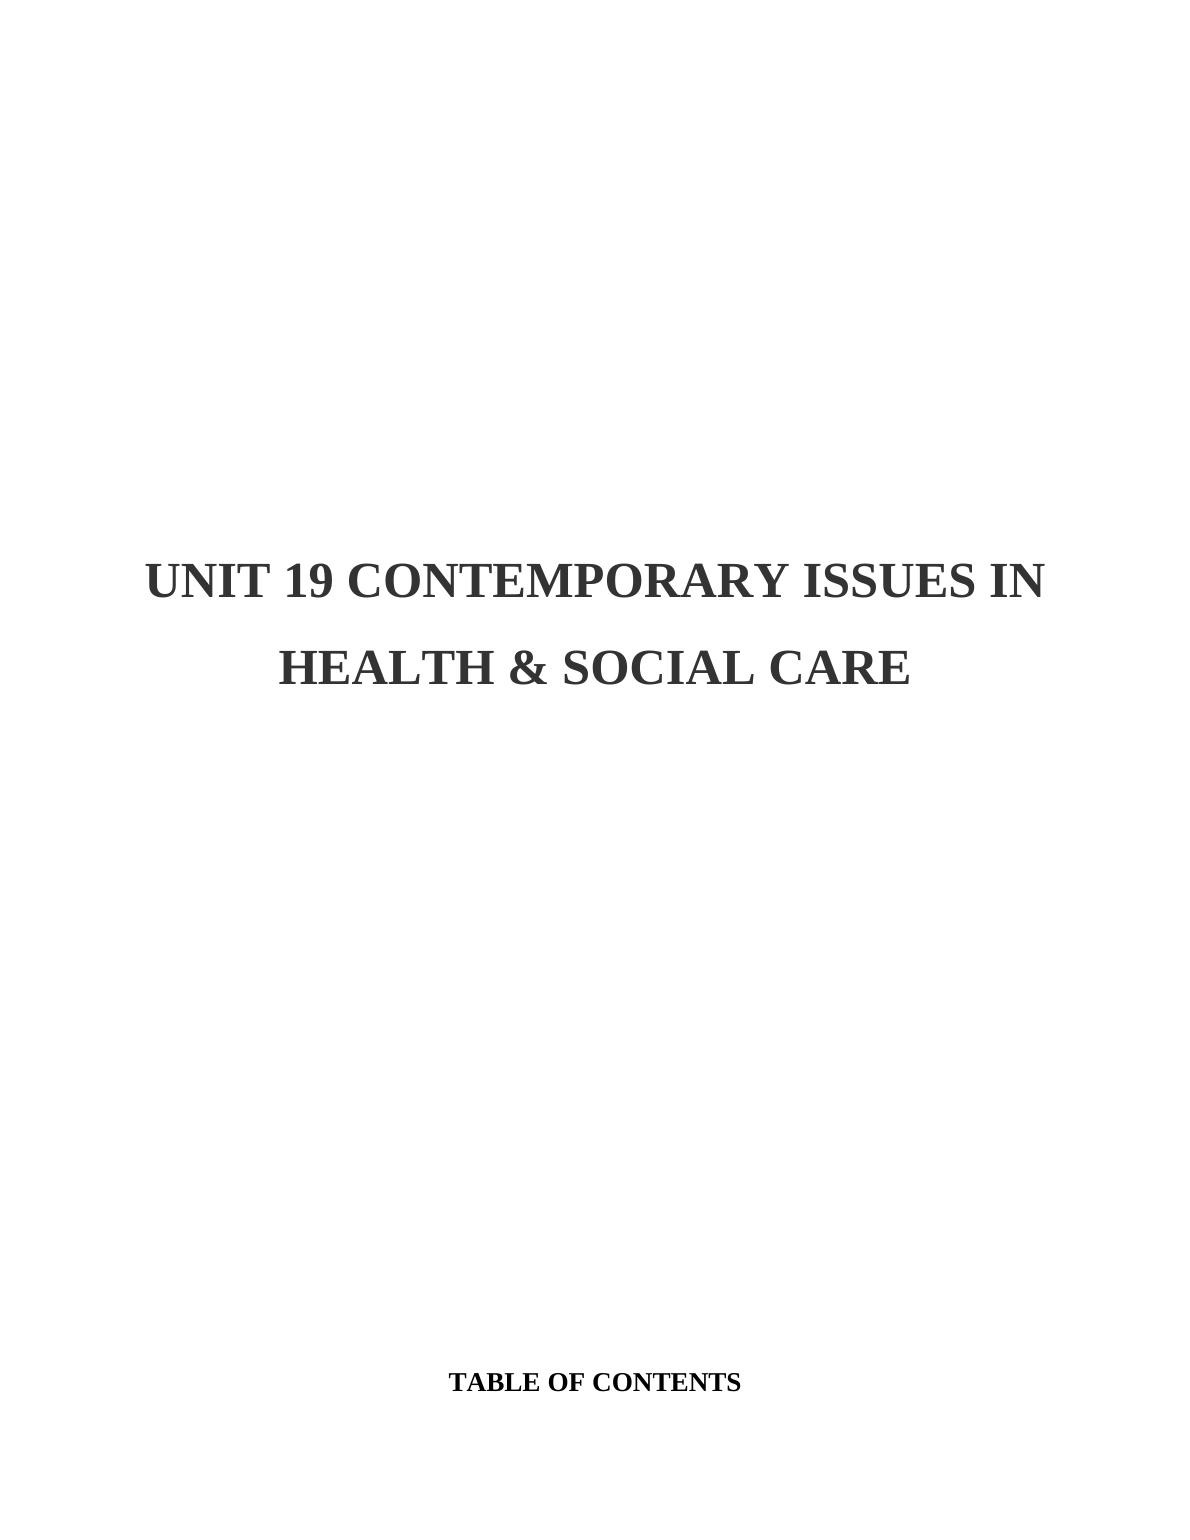 Unit 19 Contemporary Issues in Health & Social Care Assignment_1